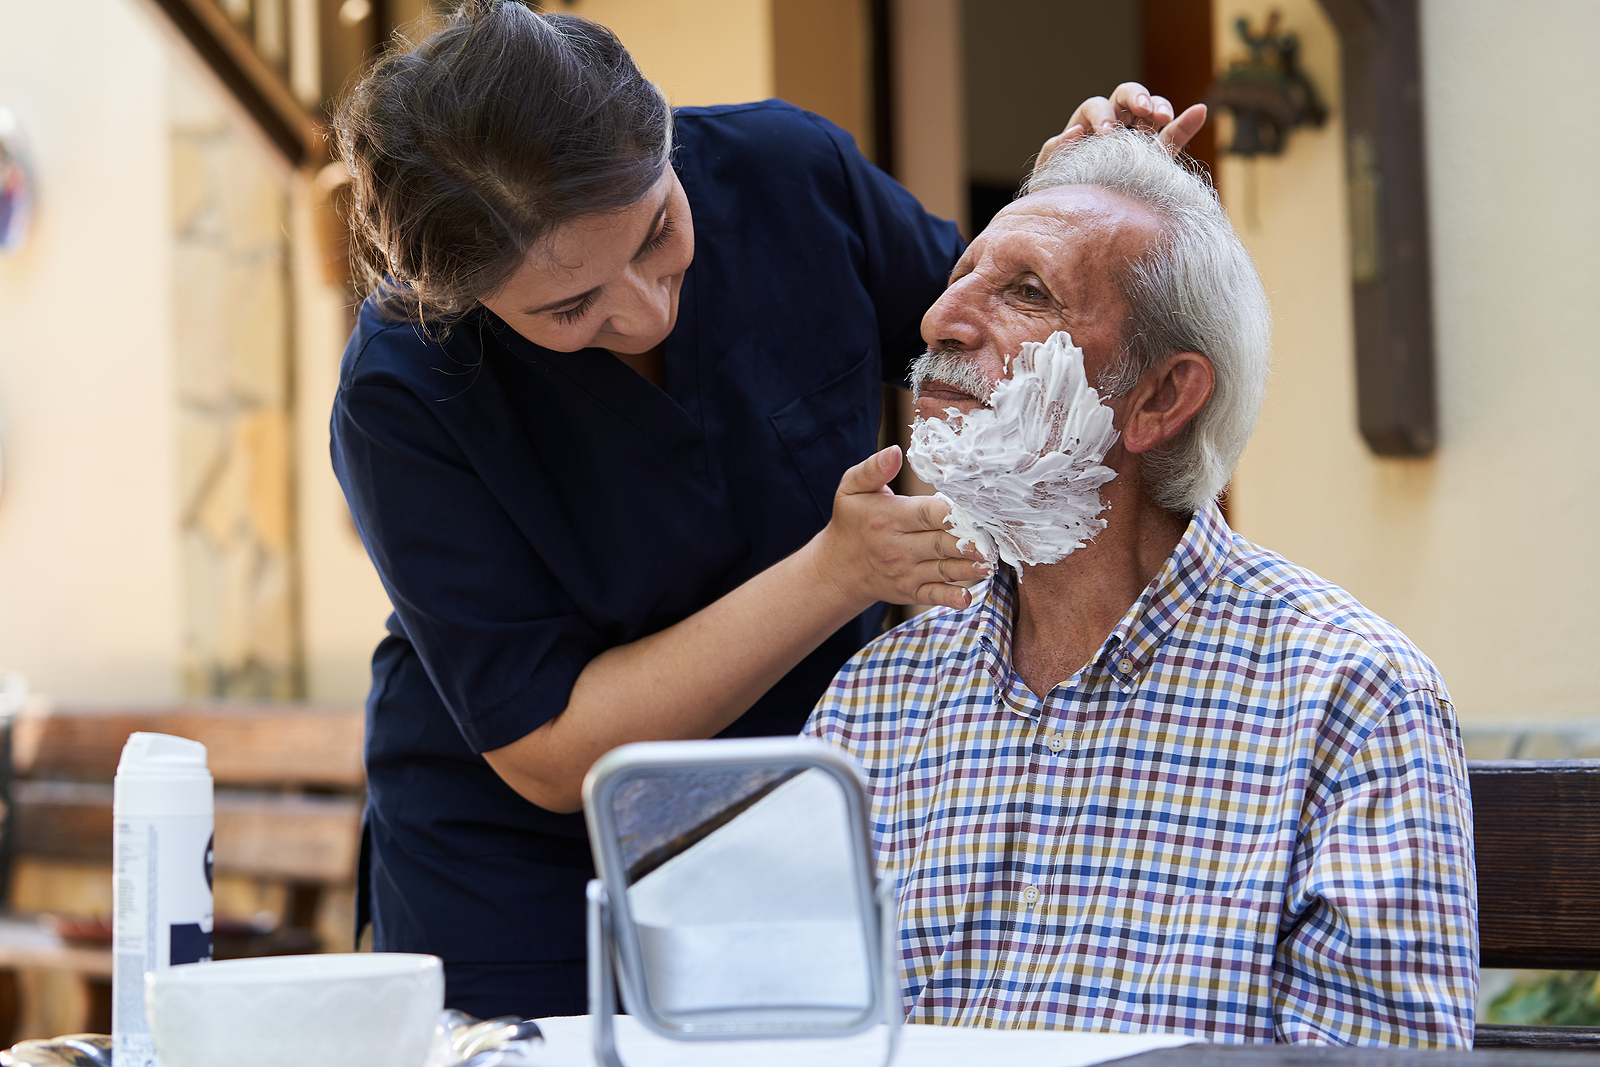 What Happens With Personal Care as Alzheimer’s Progresses?